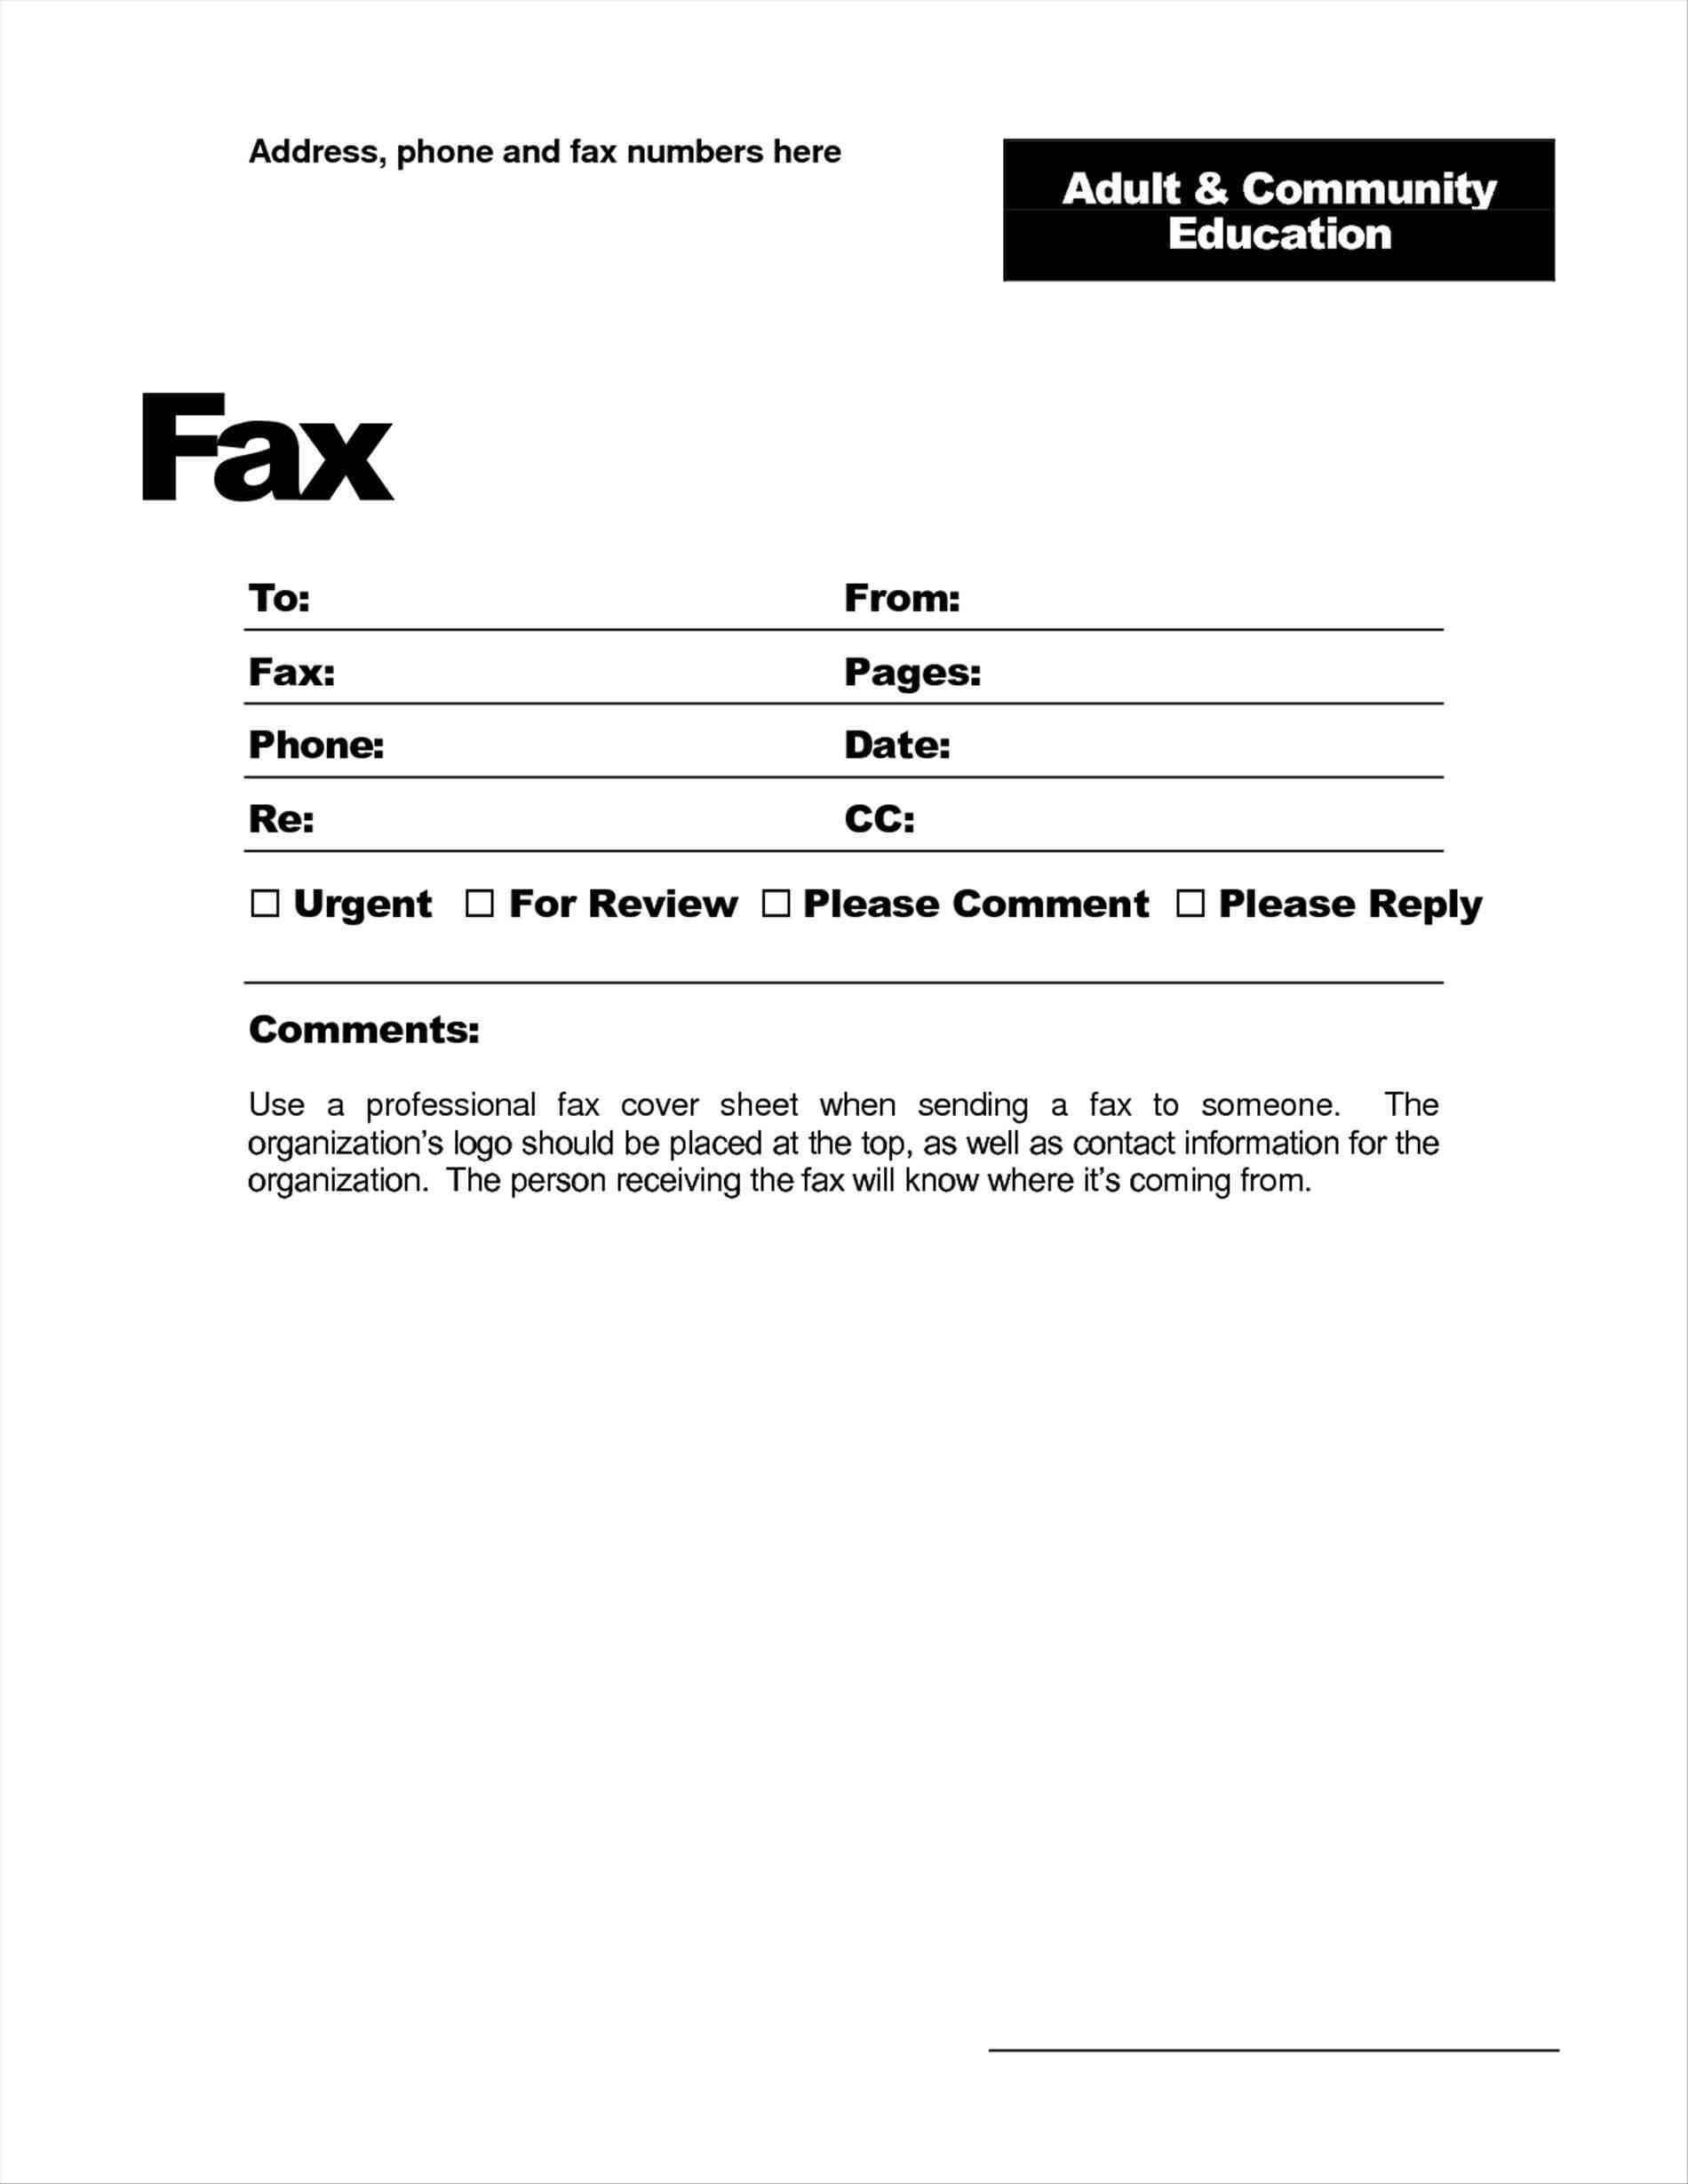 028 Basic Fax Cover Sheet Template Free Printable Example Throughout Fax Cover Sheet Template Word 2010